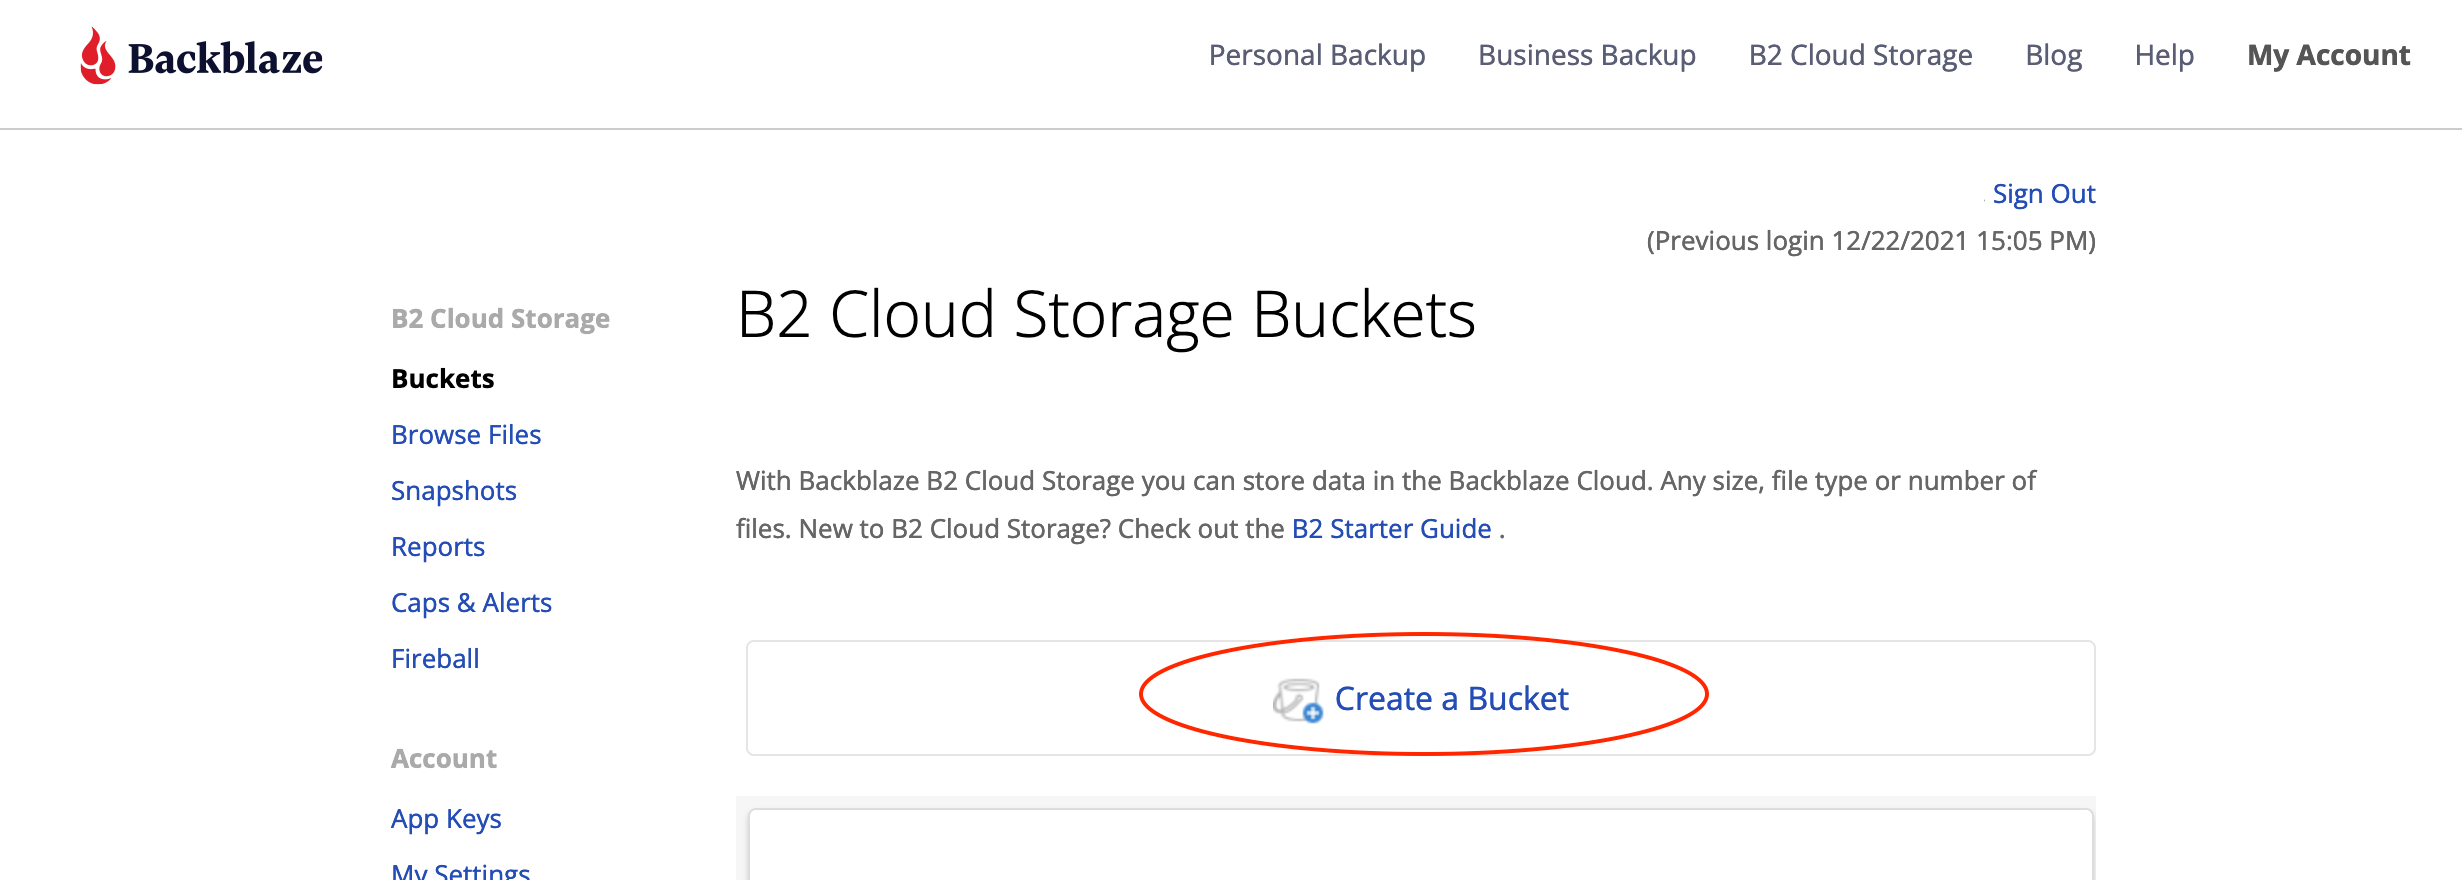 Showing the "Create a Bucket" button